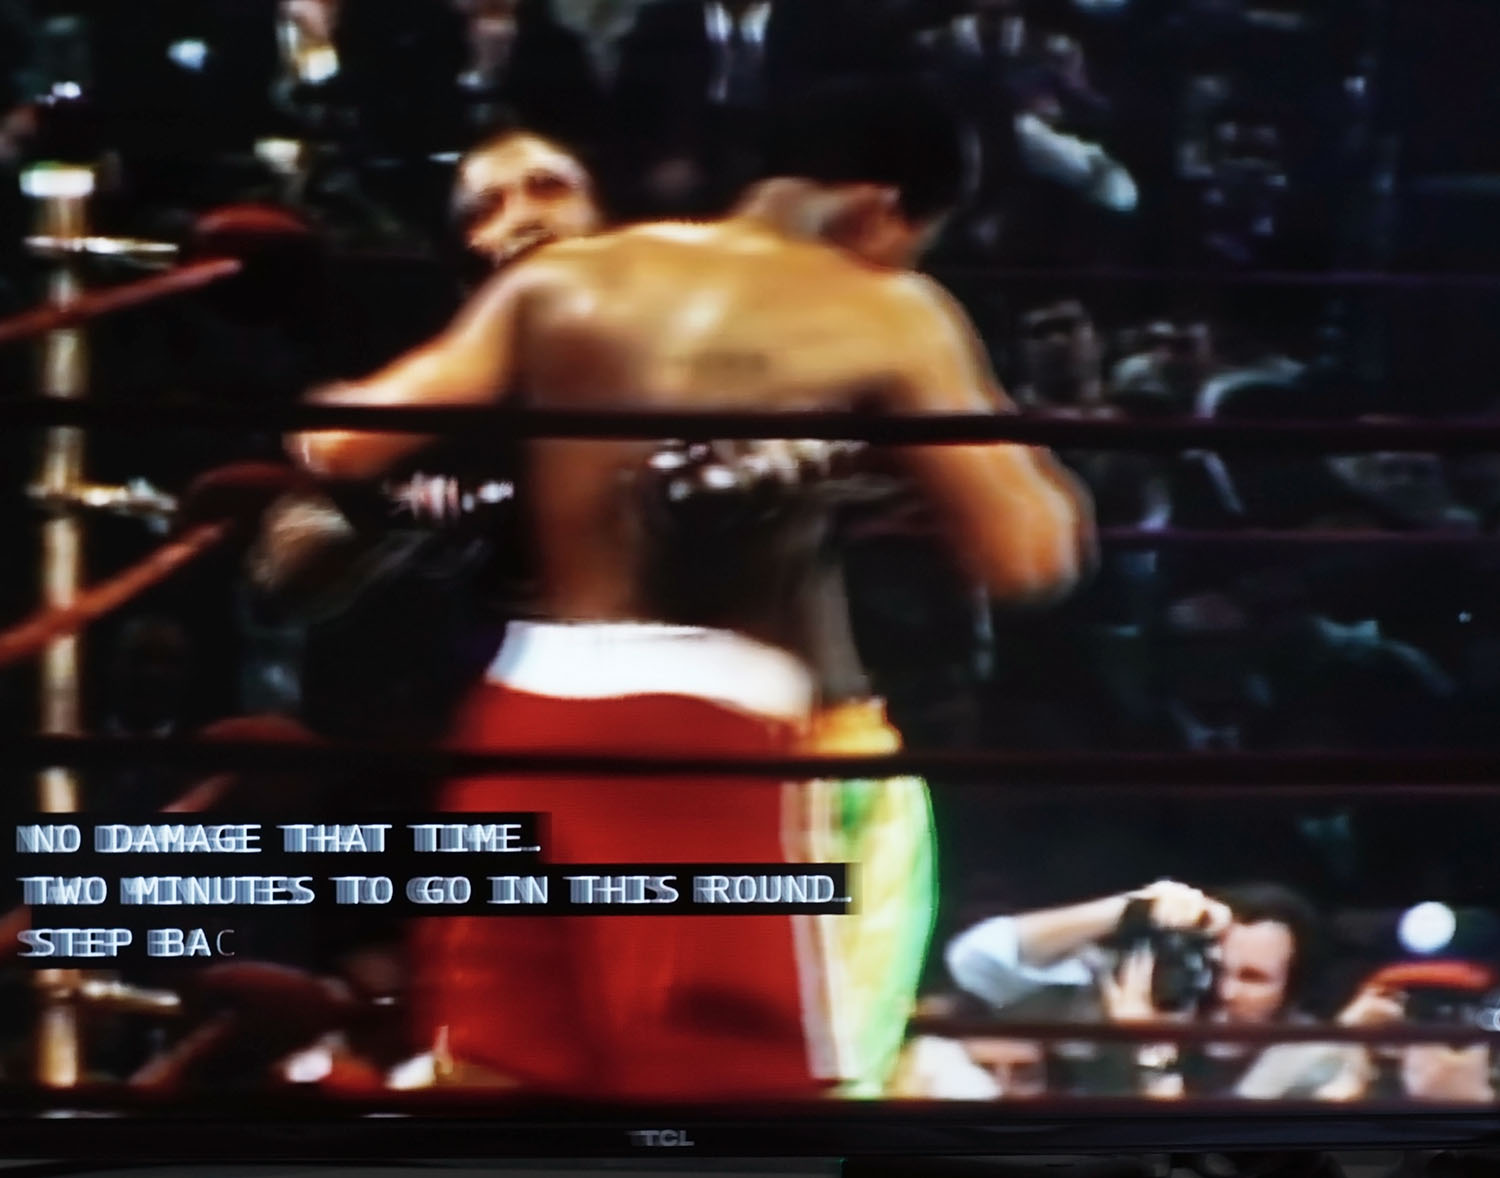 Screen Shot by David Burnett of me Photographing Fight.